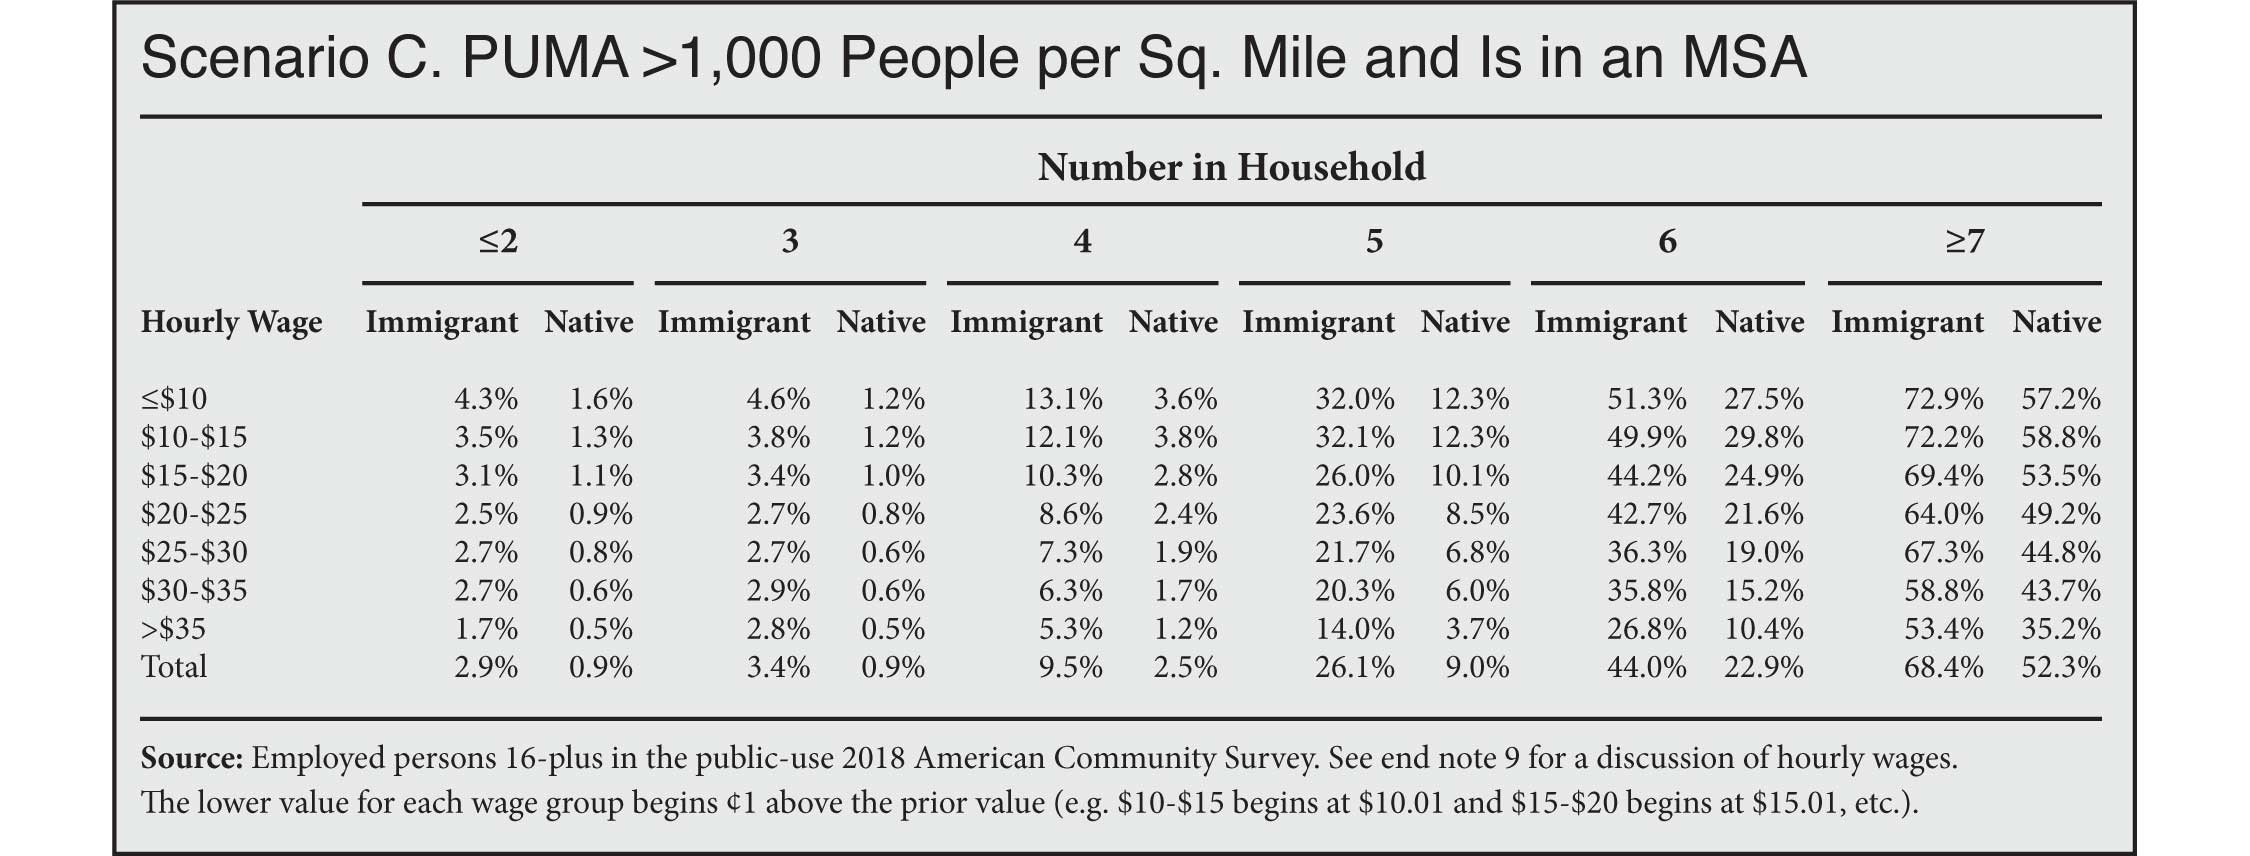 Table: Overcrowding for Immigrant and Native-Born Workers by Wage, Household Size and Population Density, PUMA >1000 people per square mile and is in a MSA